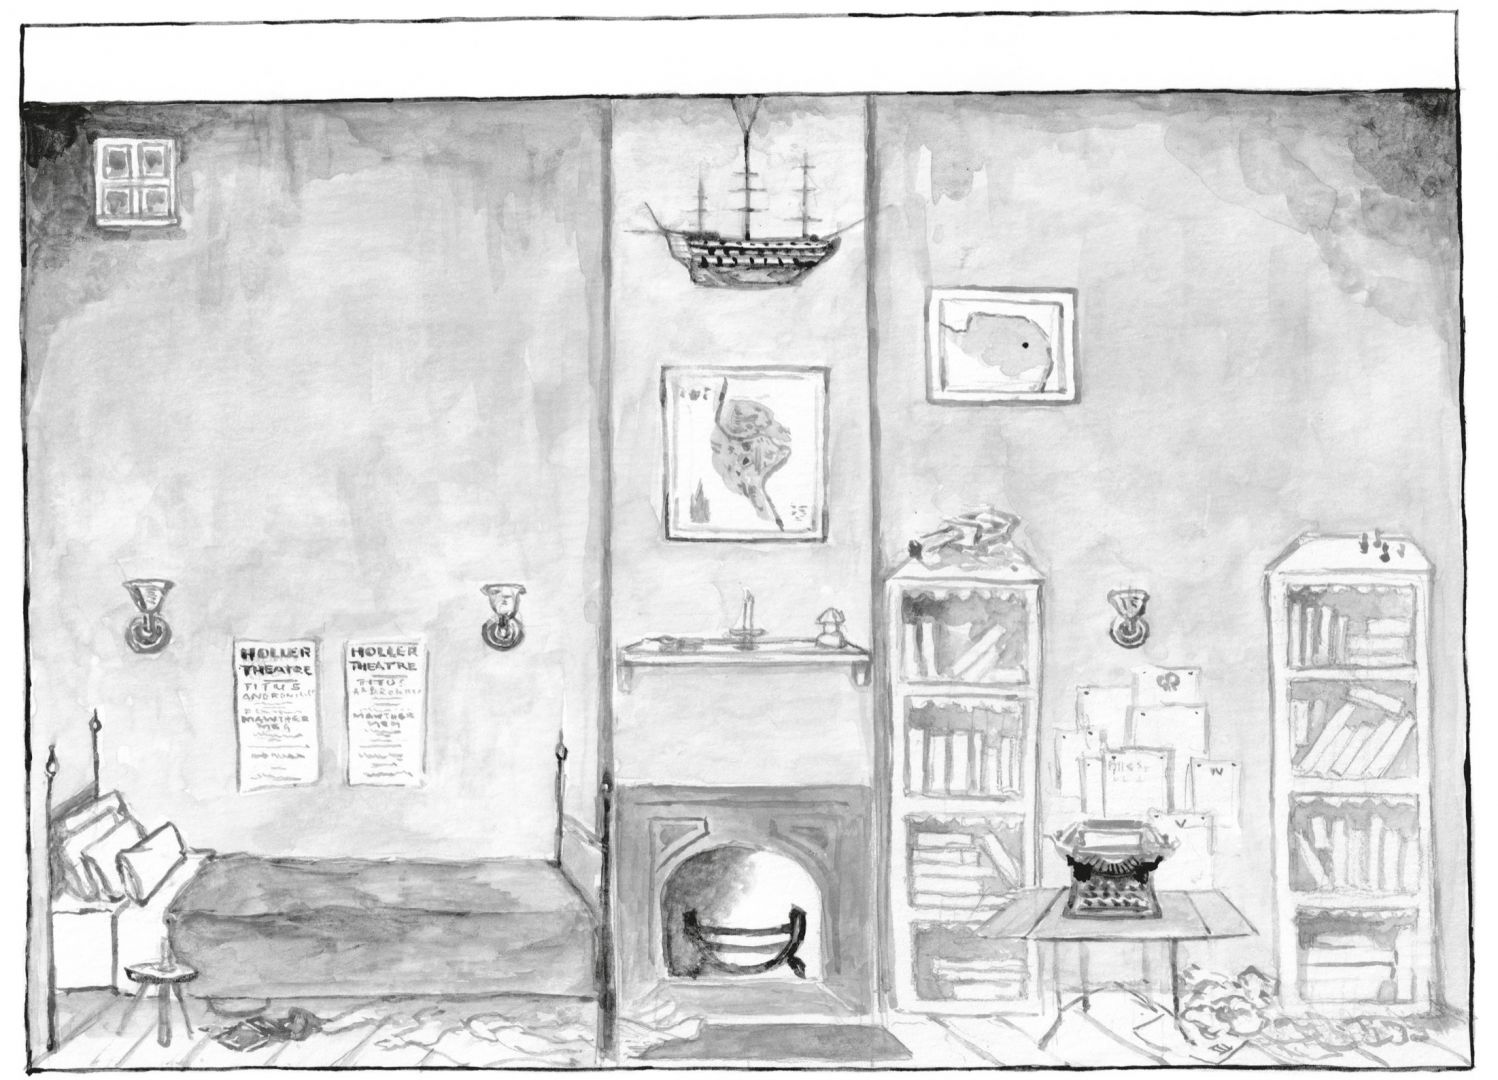 This card-­theatre backdrop is illustrated to look like Edith’s room with a bed on the left, a fireplace in the center, and bookshelves framing a desk with a typewriter on the right. Maps, toys, posters, and a model ship decorate the walls. There is a small, square window high above the bed, at the top-­left corner of the image.